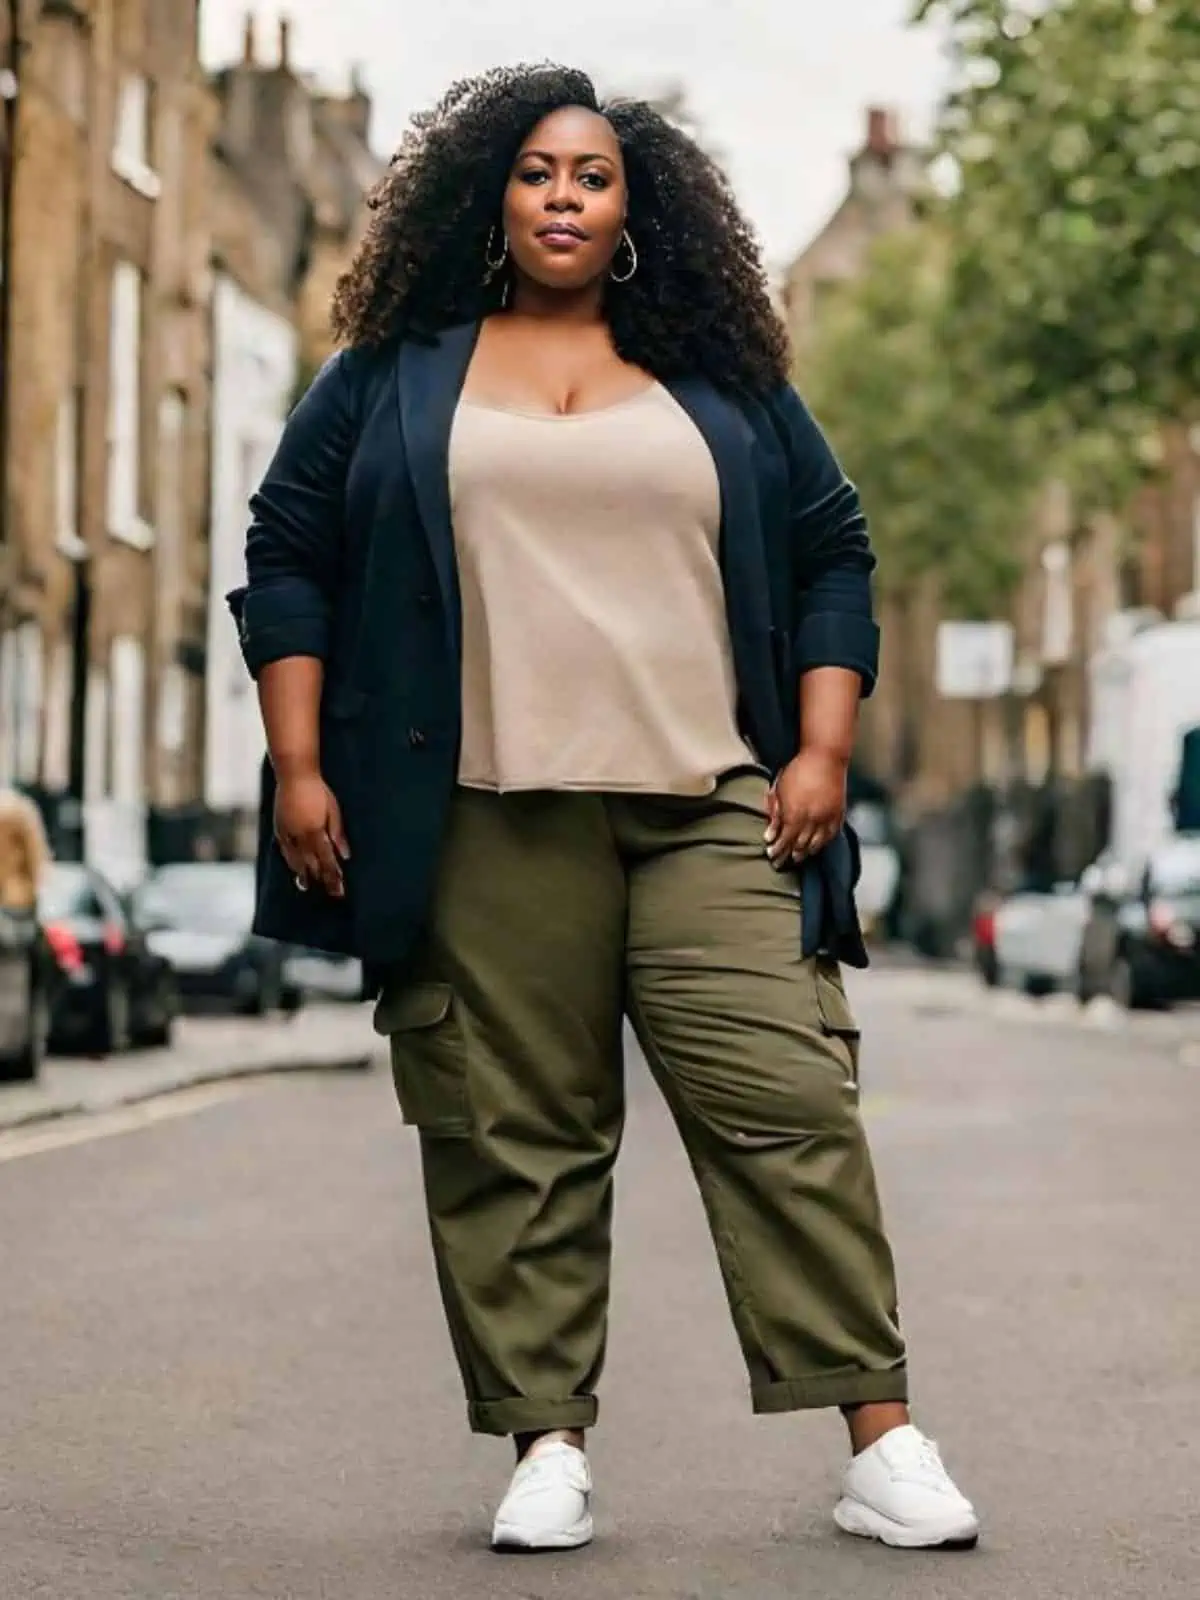 How to Style Cargo Trousers: 8 Outfit Ideas